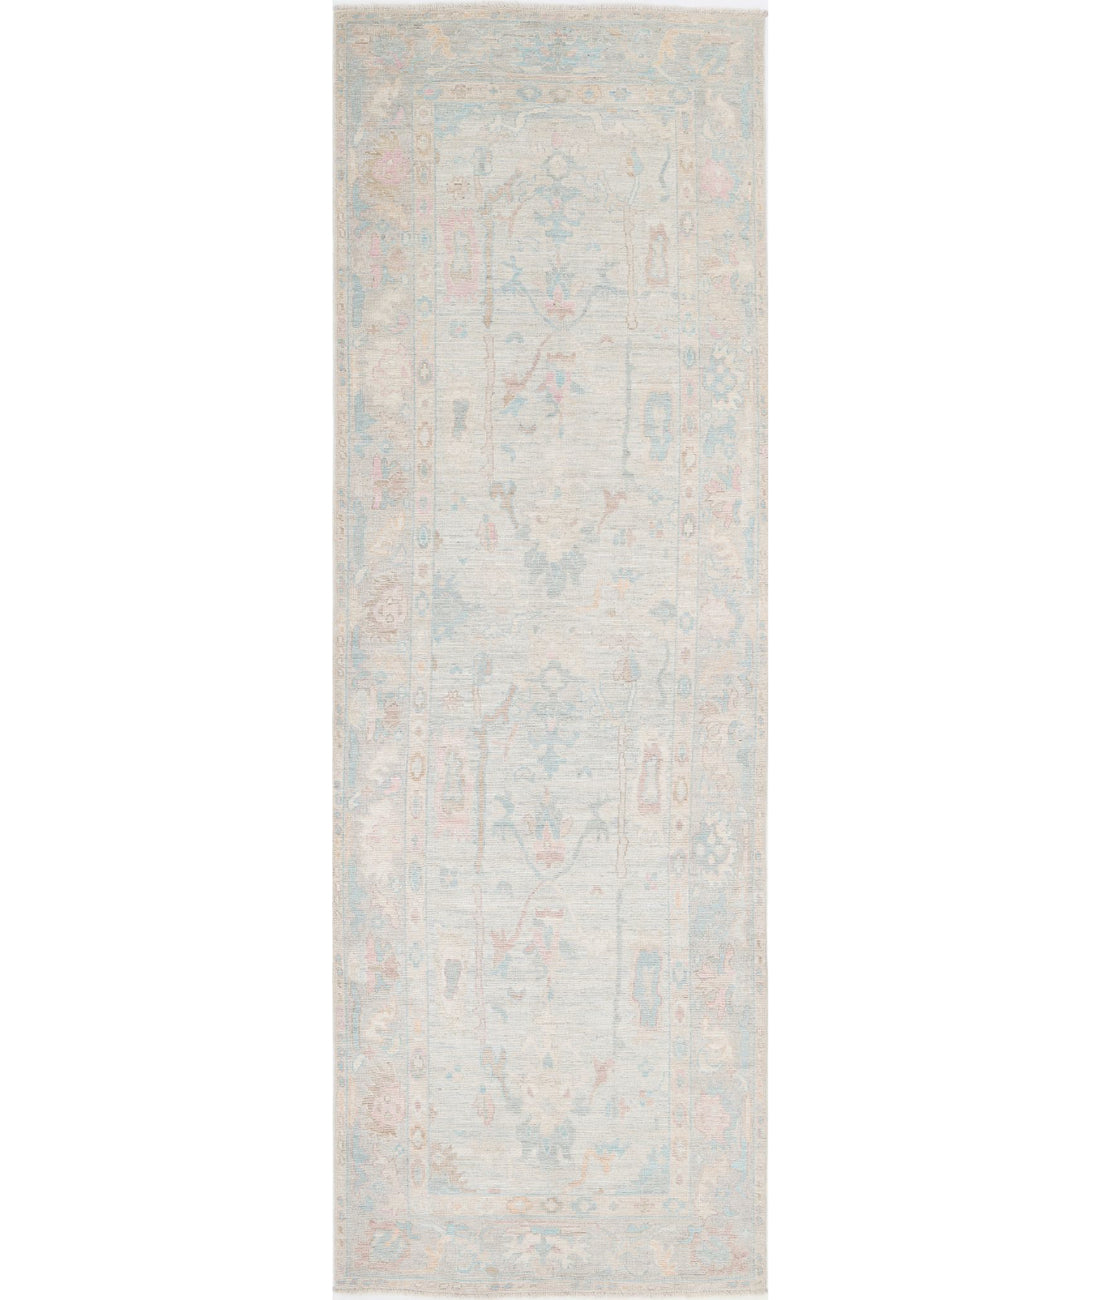 Hand Knotted Oushak Wool Rug - 4'1'' x 12'6'' 4'1'' x 12'6'' (123 X 375) / Ivory / Grey